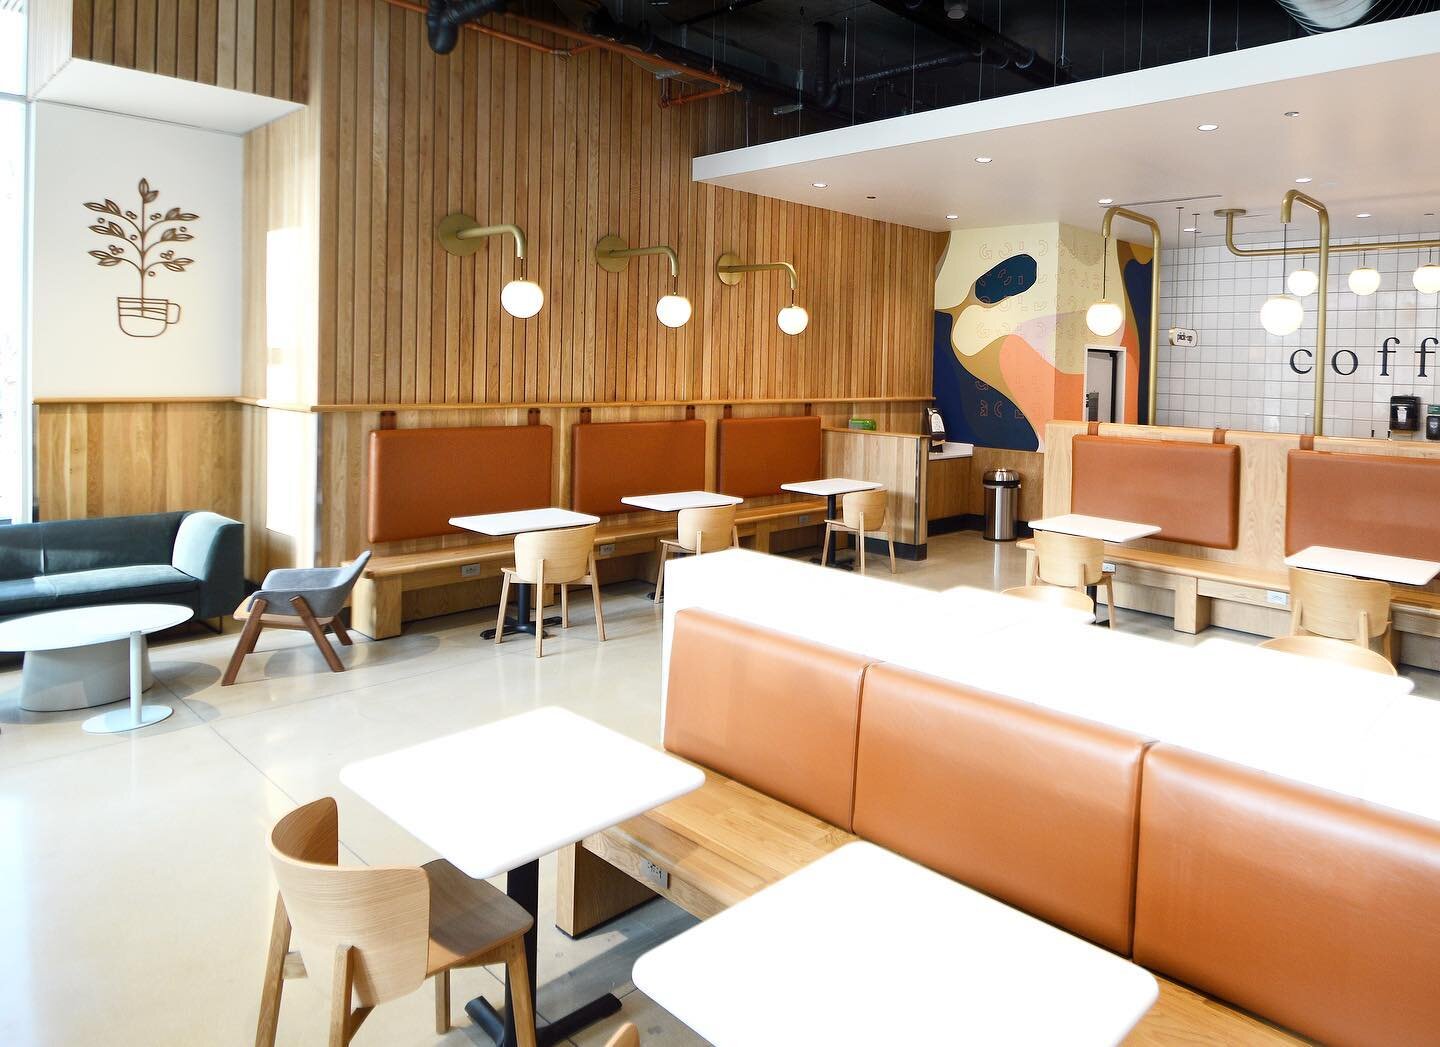 @wholefoods recently opened their coffee shop located on the first level of Chicago&rsquo;s Gold Coast location. Blend provided design services for custom seating, millwork &amp; lighting. Our finishes along with signage and decor helped form a cohes